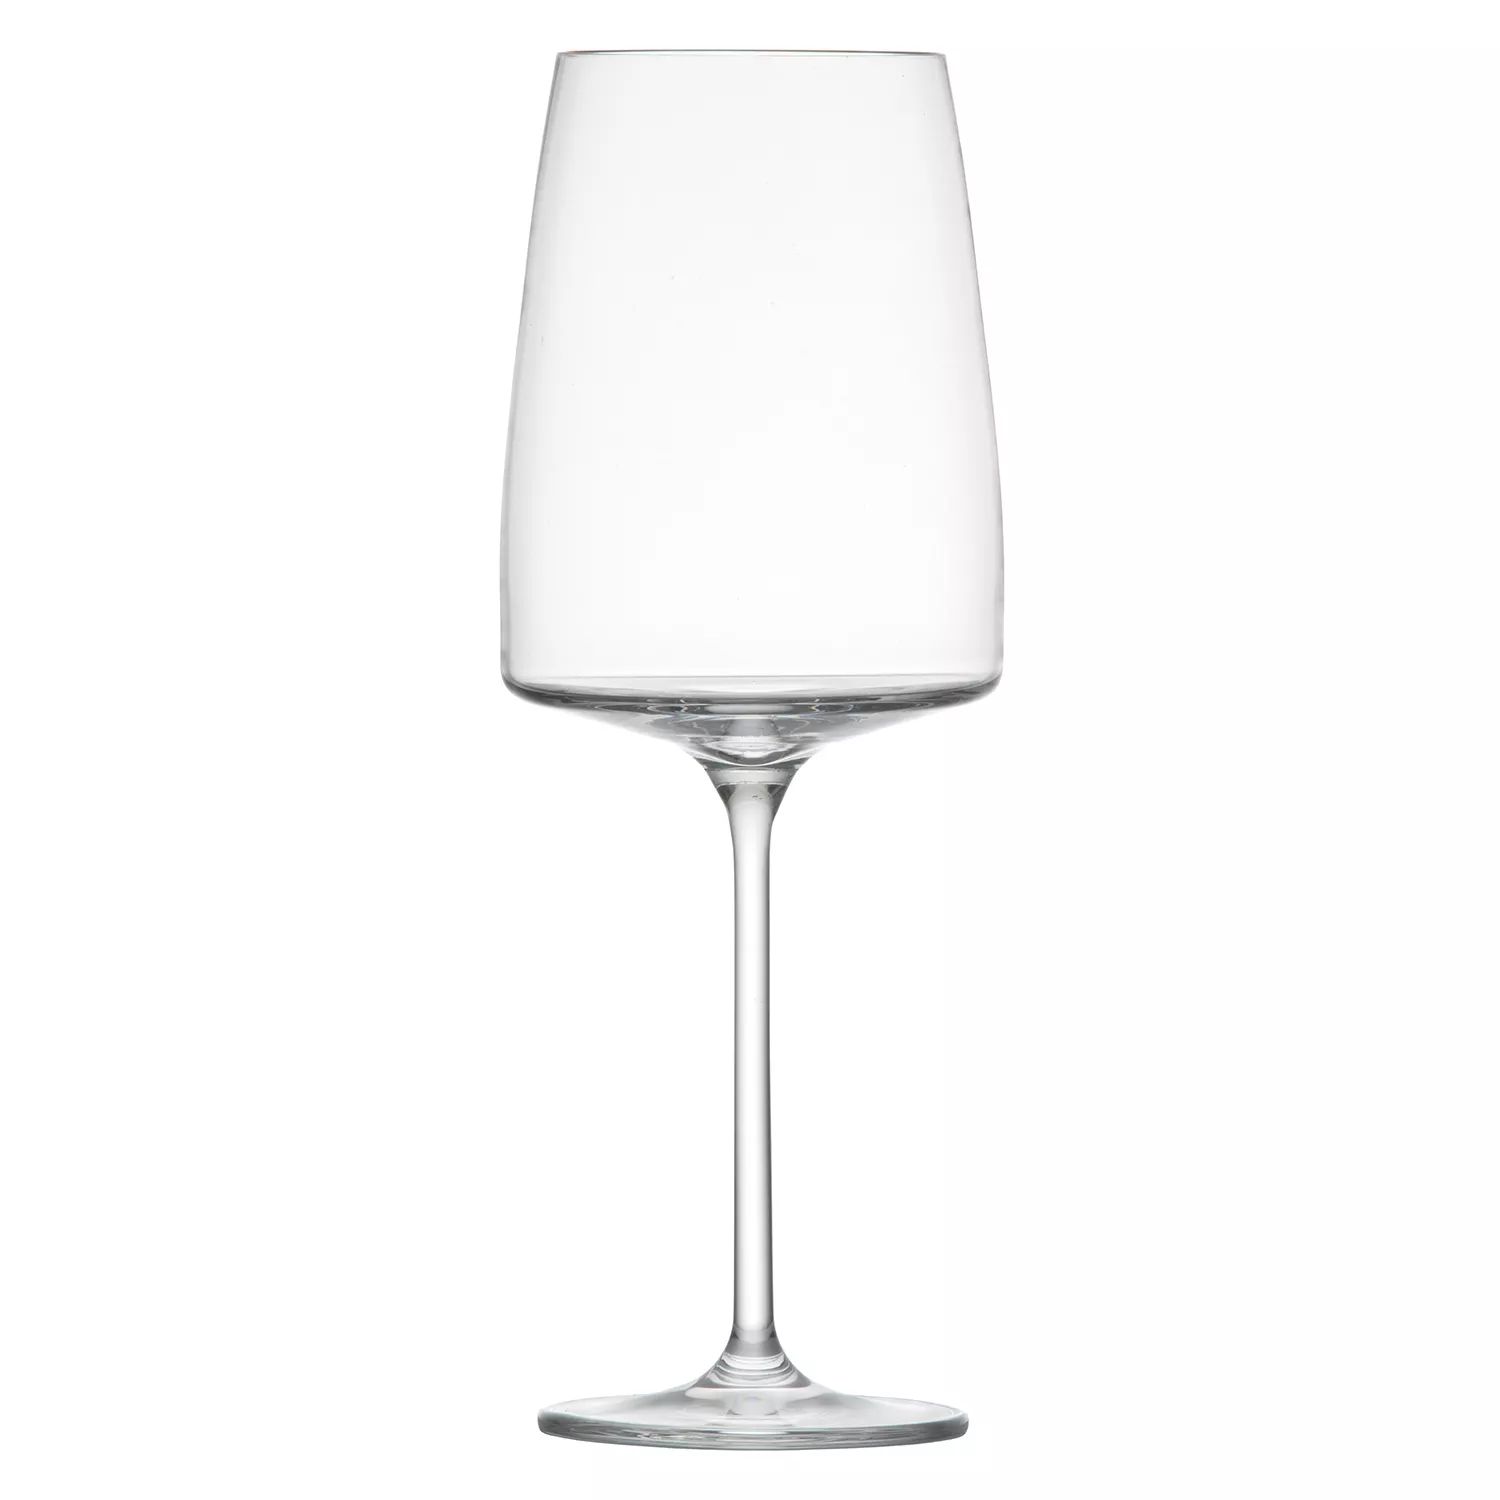 Zweisel Pure Wine Glasses - The Blind Monk